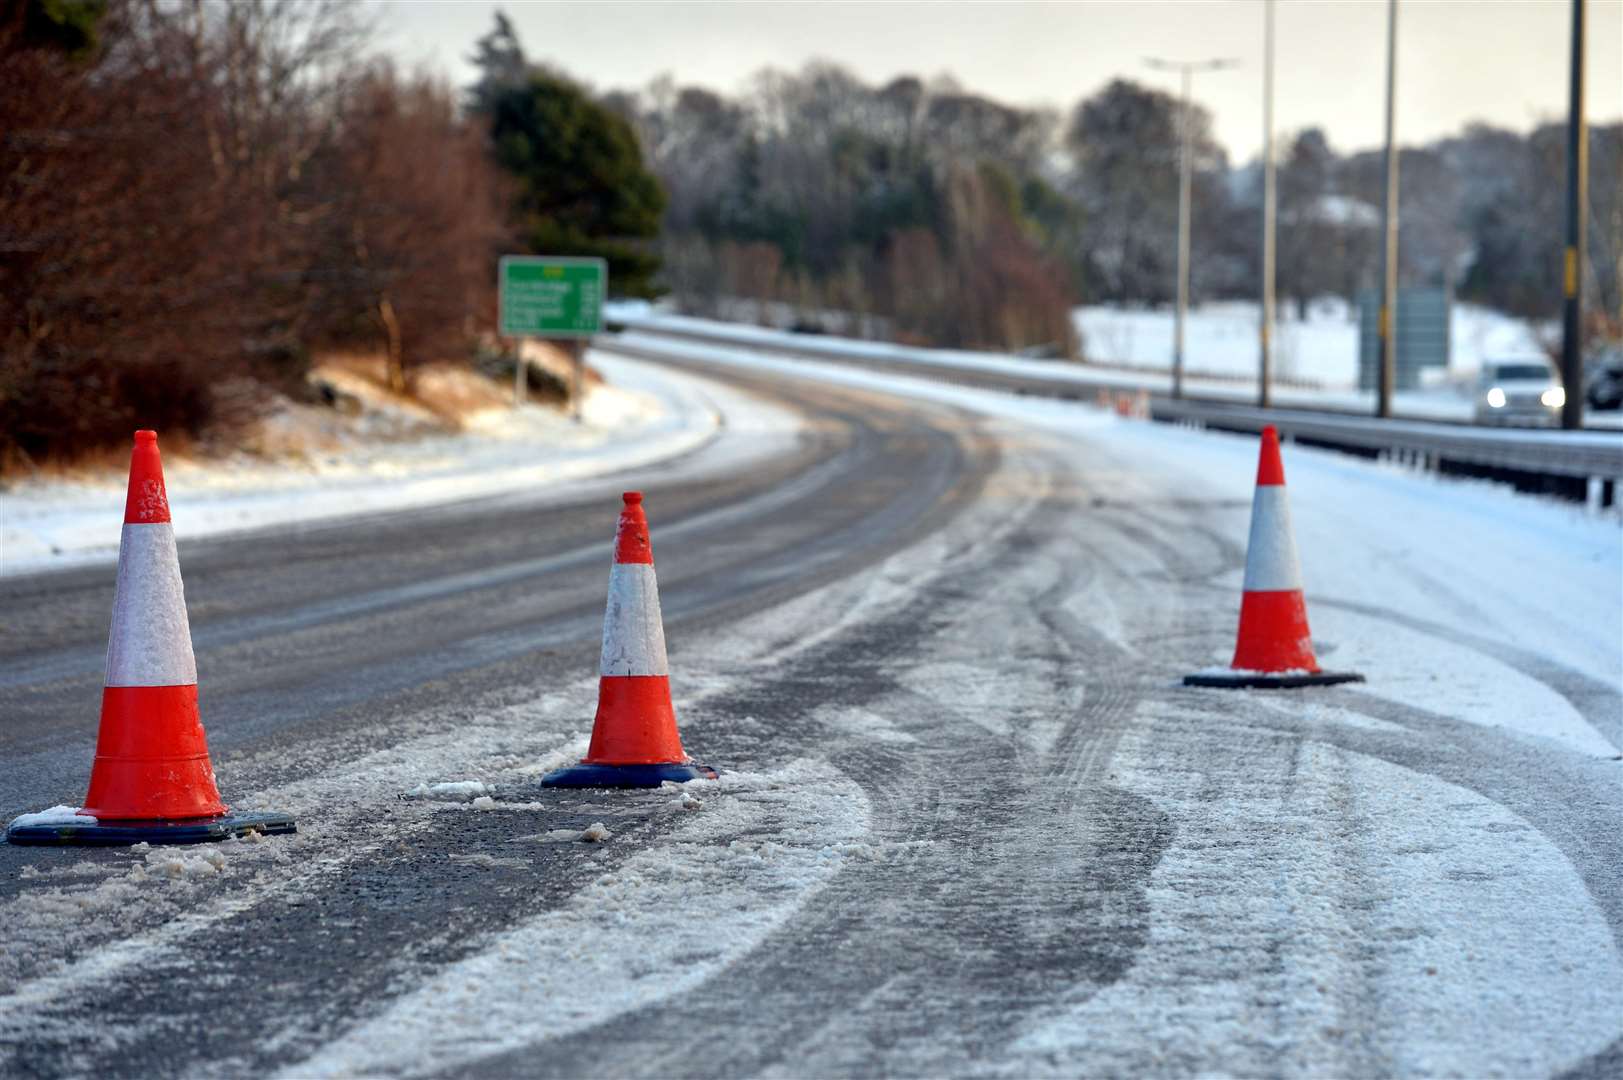 The A9 was closed in both directions but has since reopened.